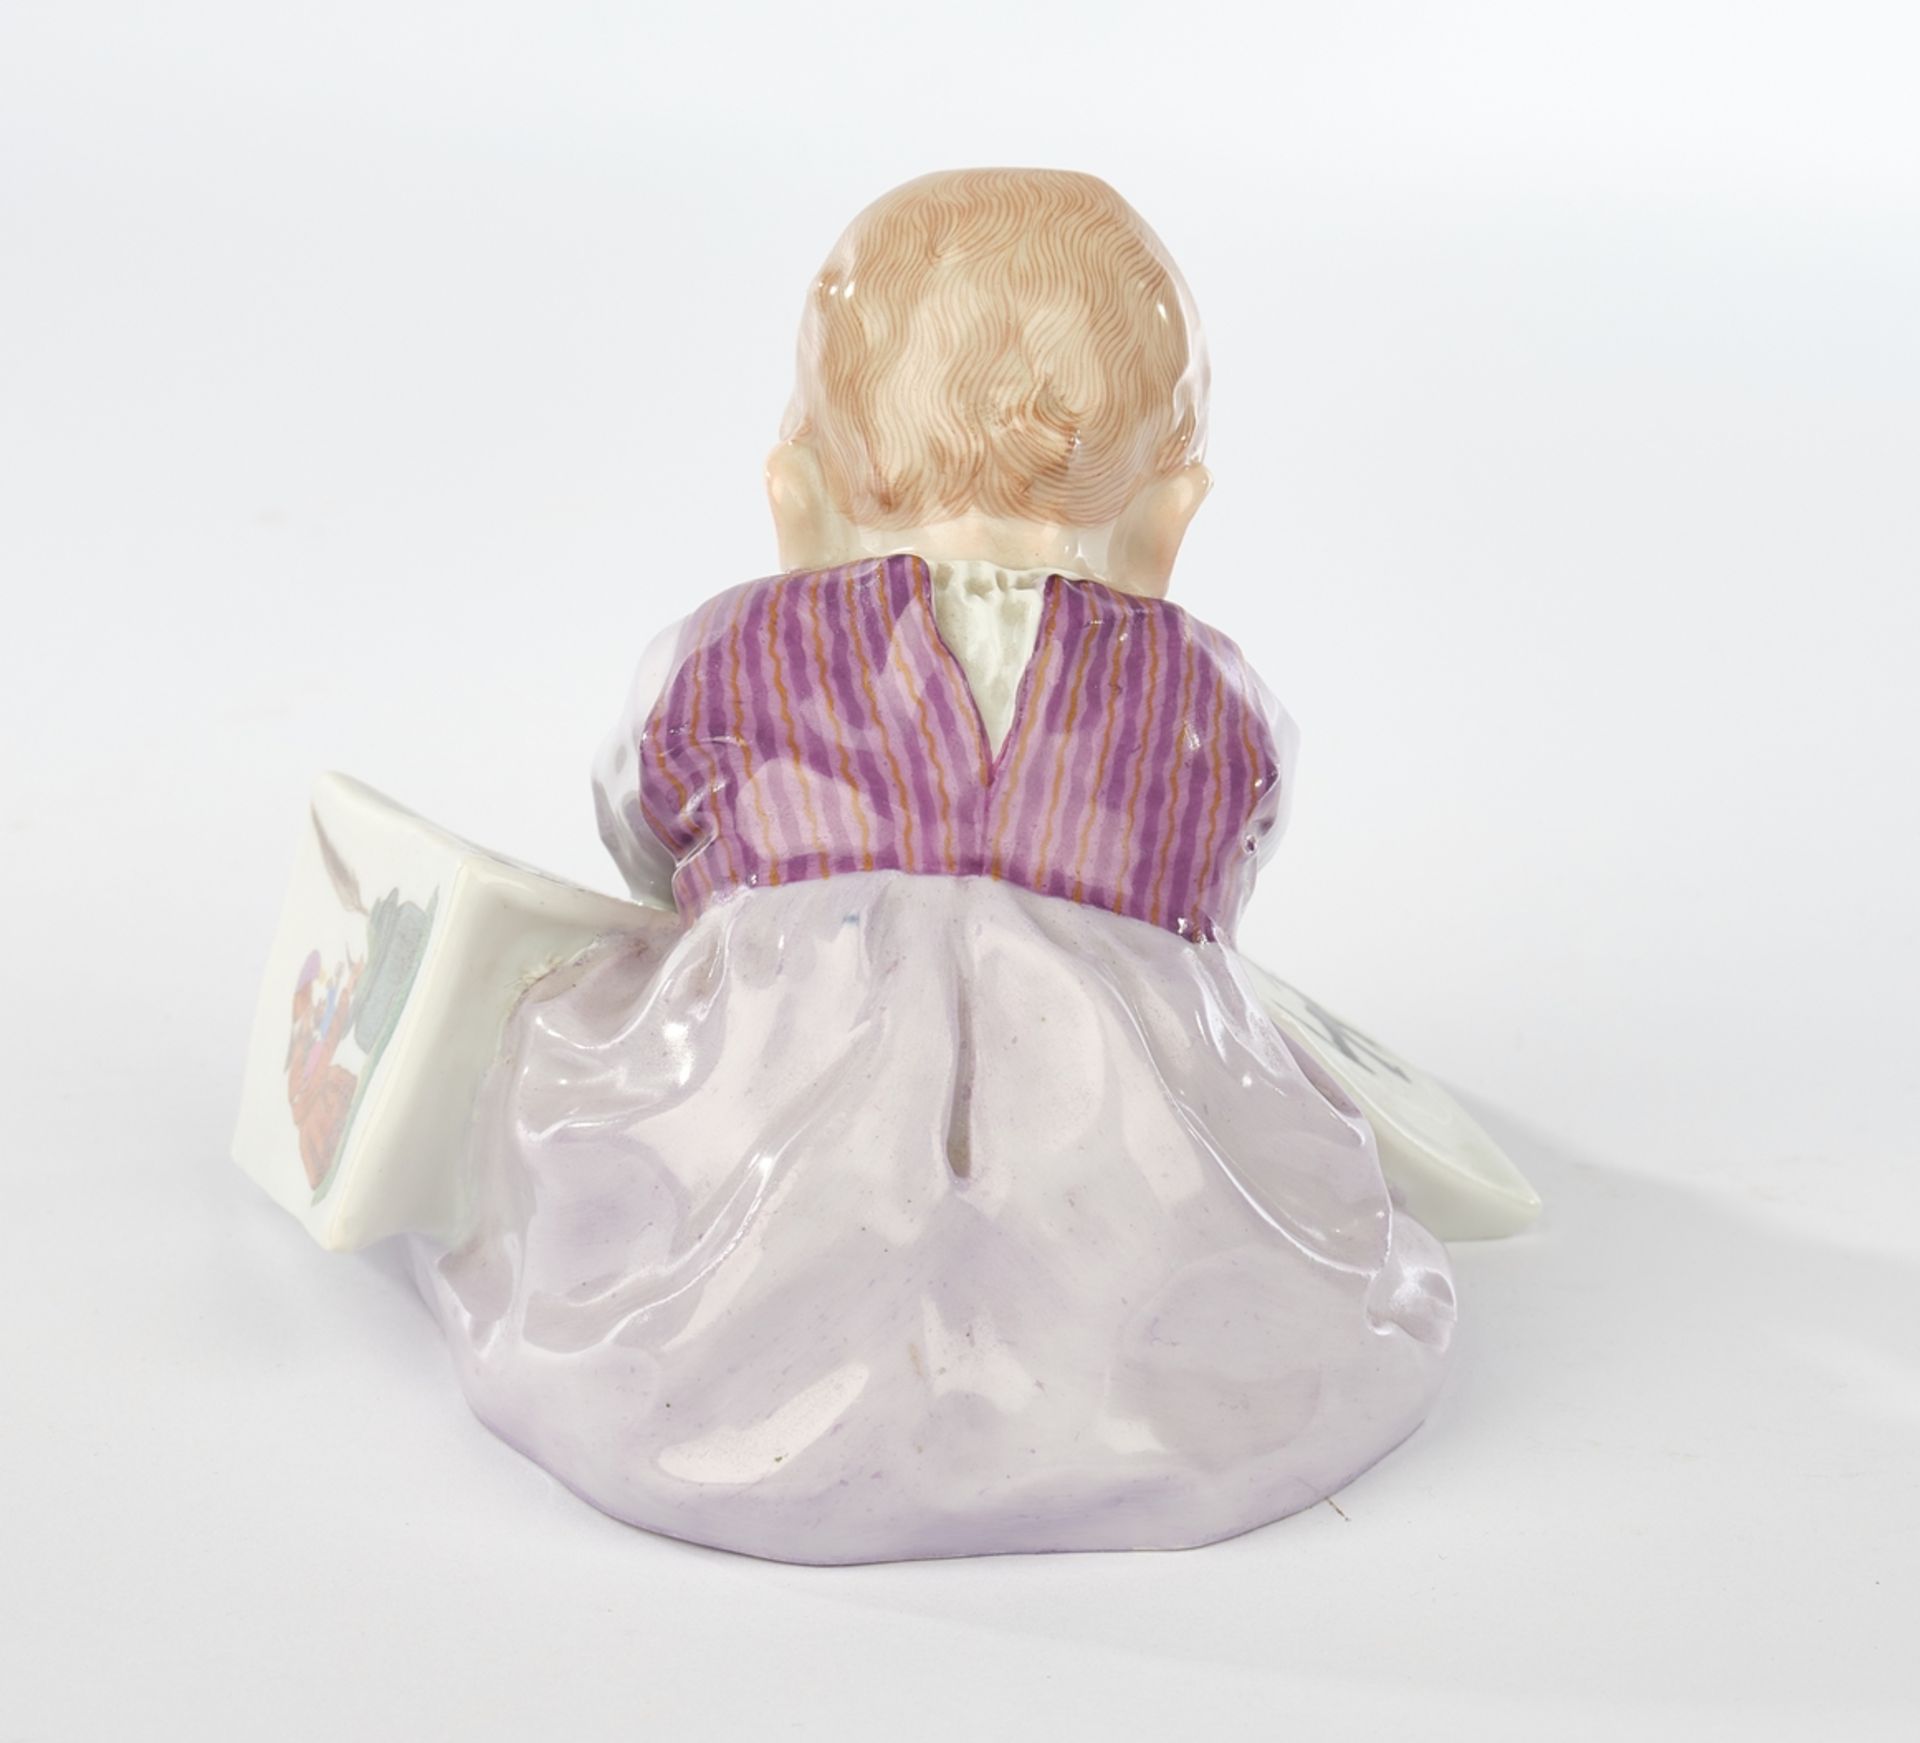 Porcelain figurine, , "Child with picture book, large", Meissen, sword mark, 1904-1924, 1st choice, - Image 4 of 5